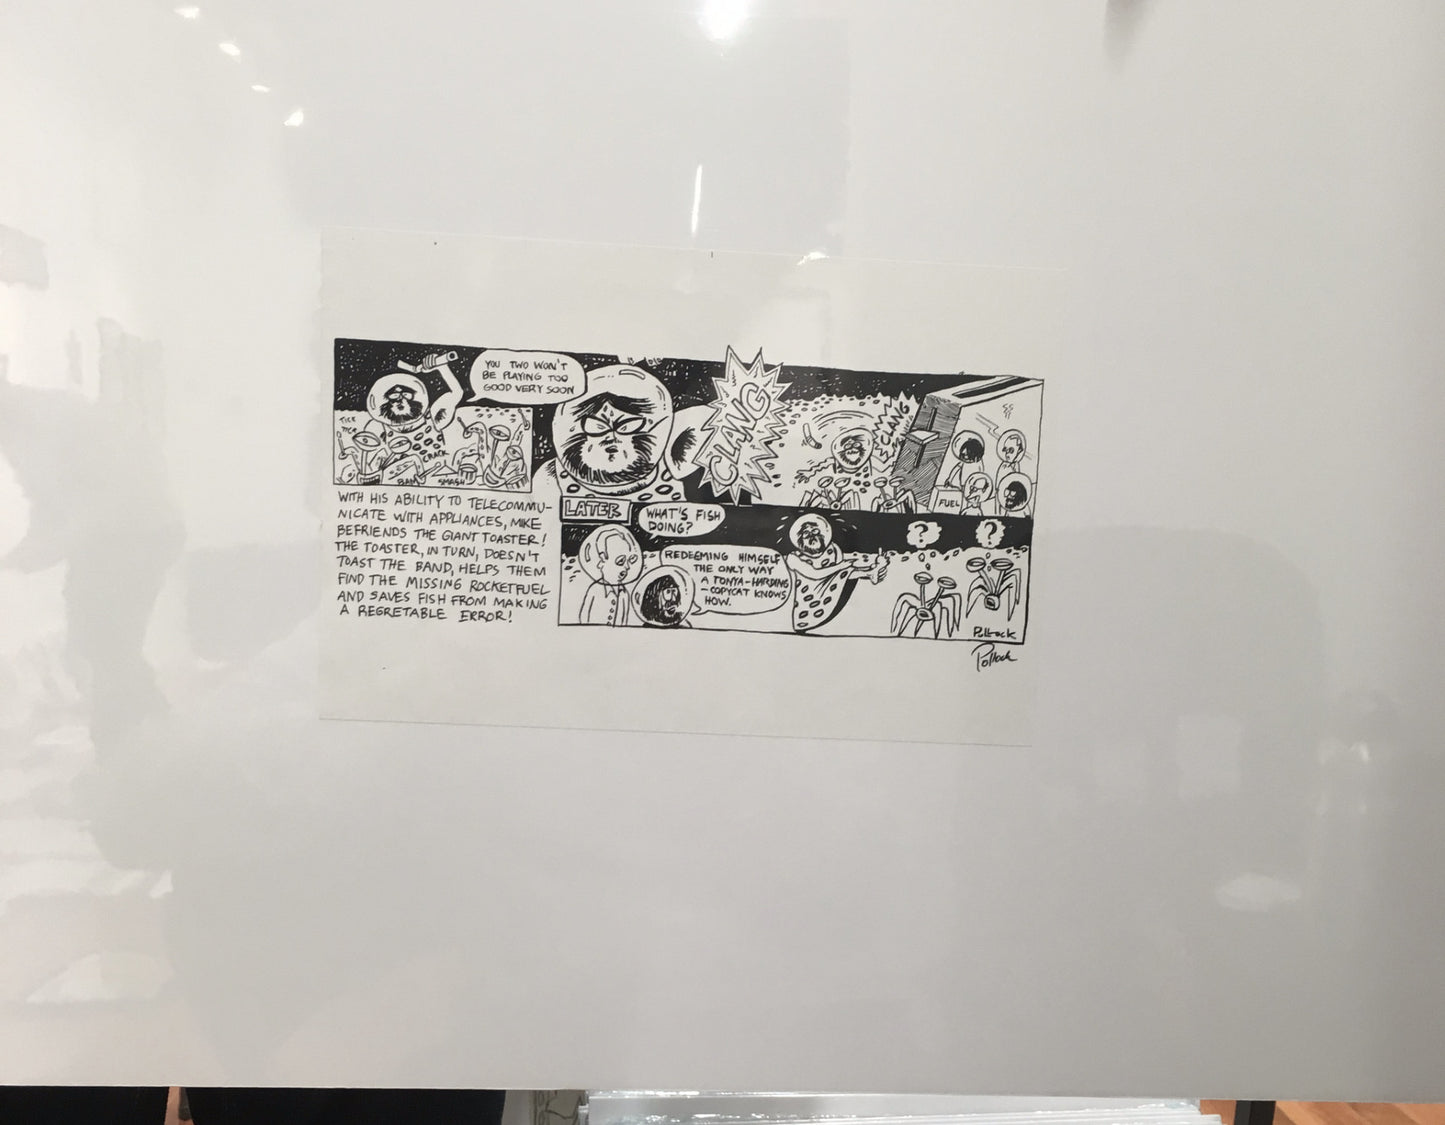 Phish Fishman space comic featured in Spring 1995 Doniac Schvice